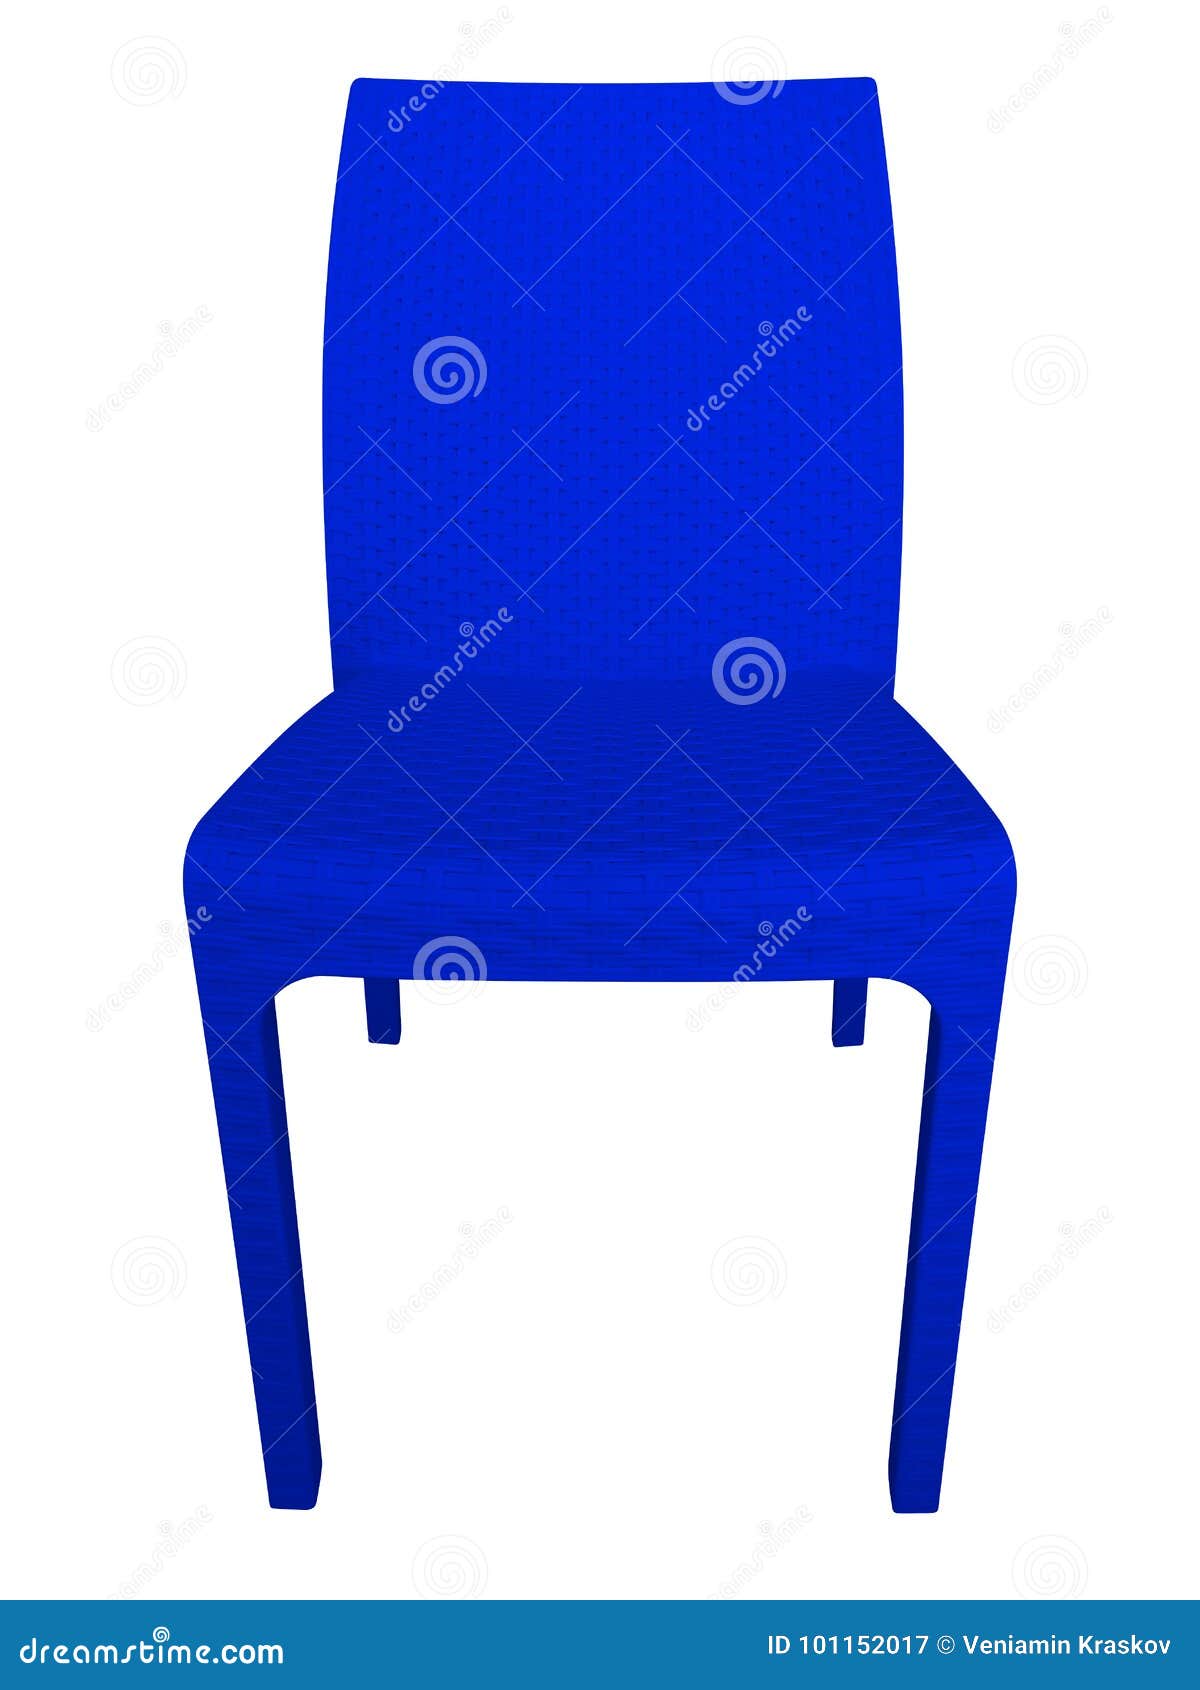 Wicker chair - blue. Wicker blue chair isolated with clipping path